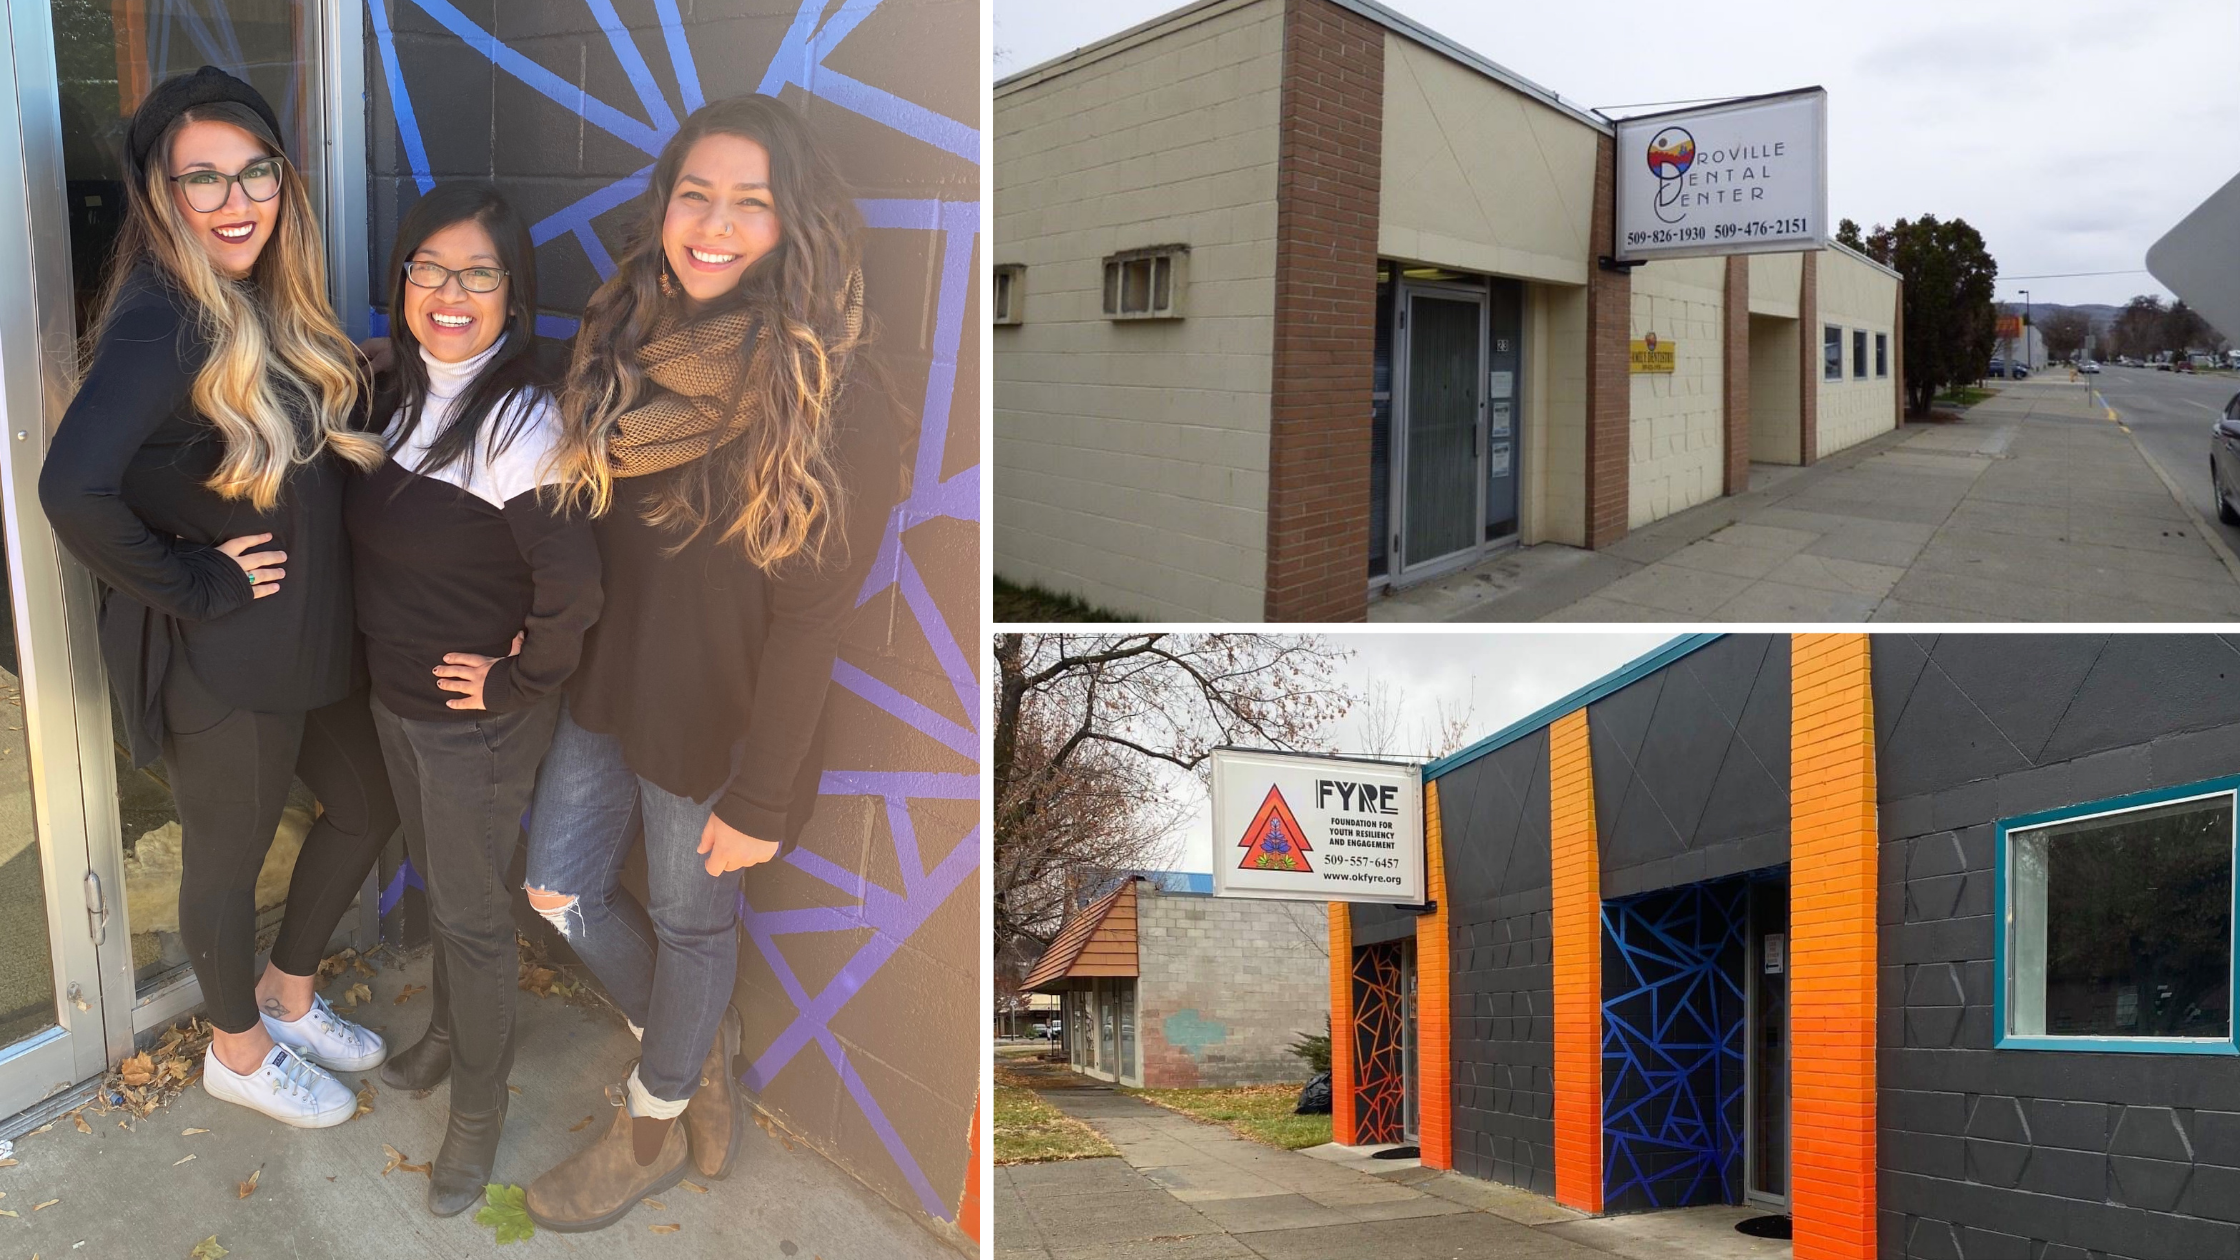 The three co-founders of FYRE, Amitie, Mady, and Michelle Sandoval with a “before” and “after” of their newly renovated building. Photos courtesy of FYRE.